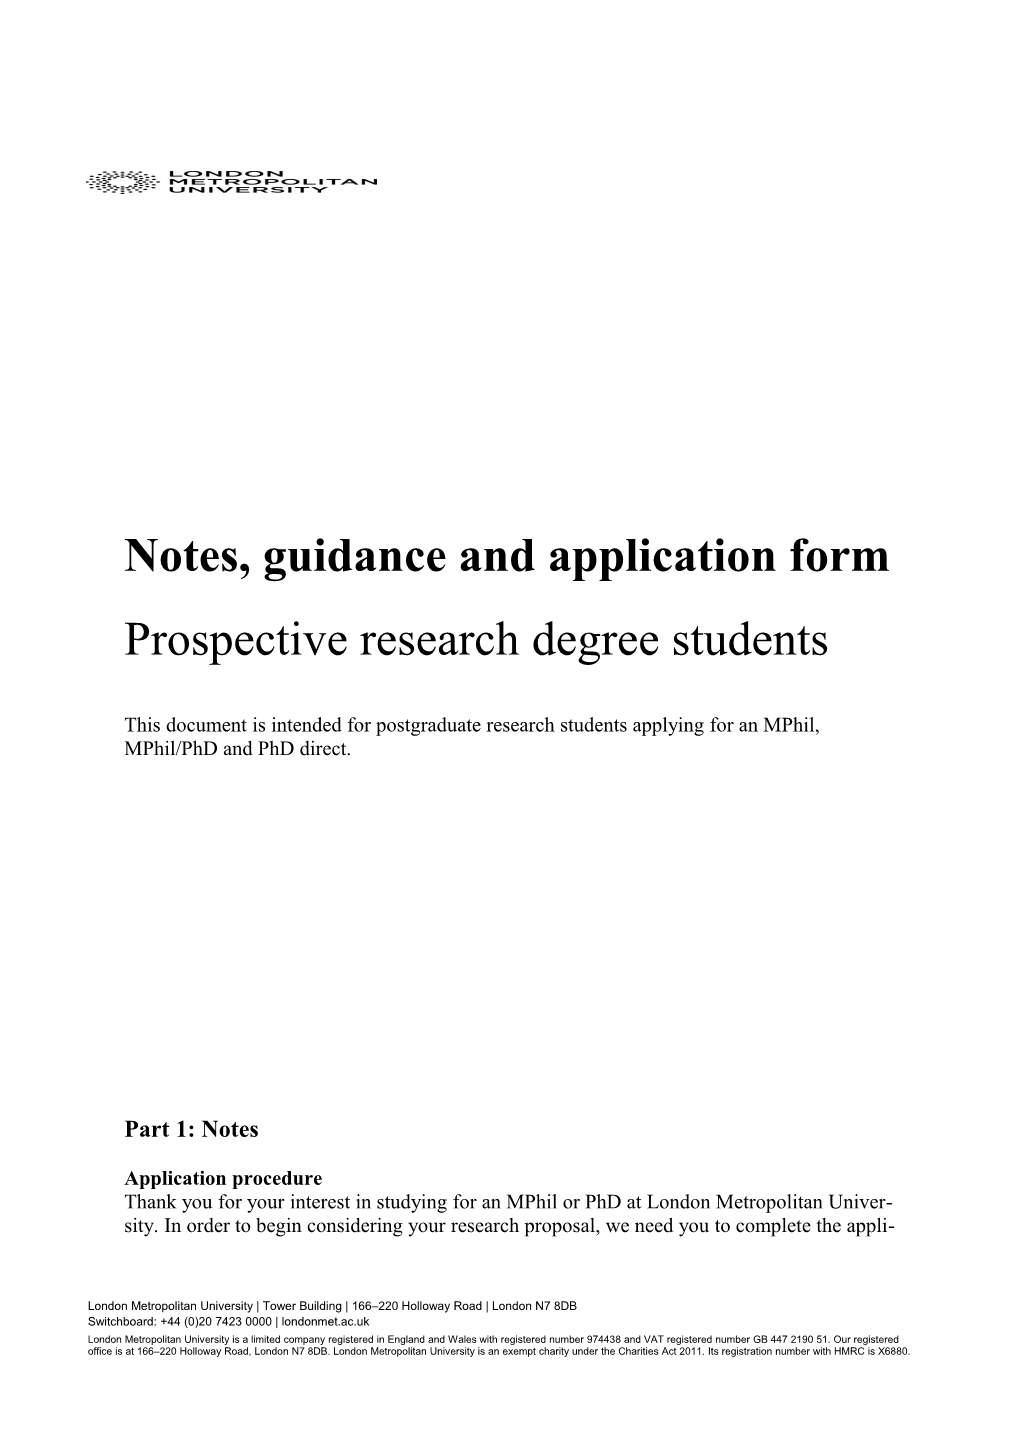 Notes, Guidance and Application Form